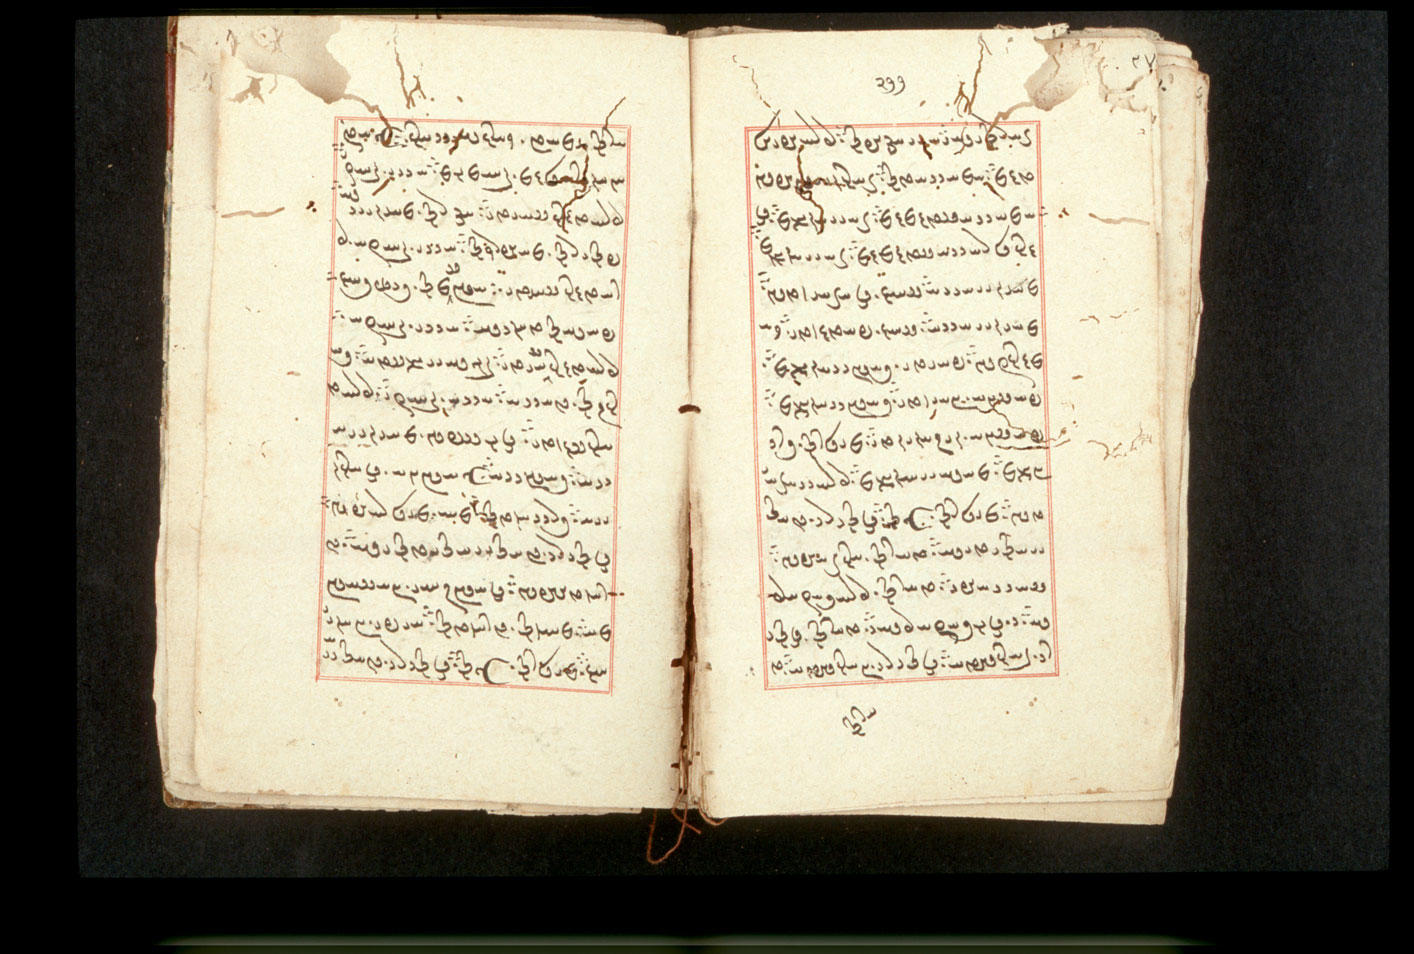 Folios 277v (right) and 278r (left)